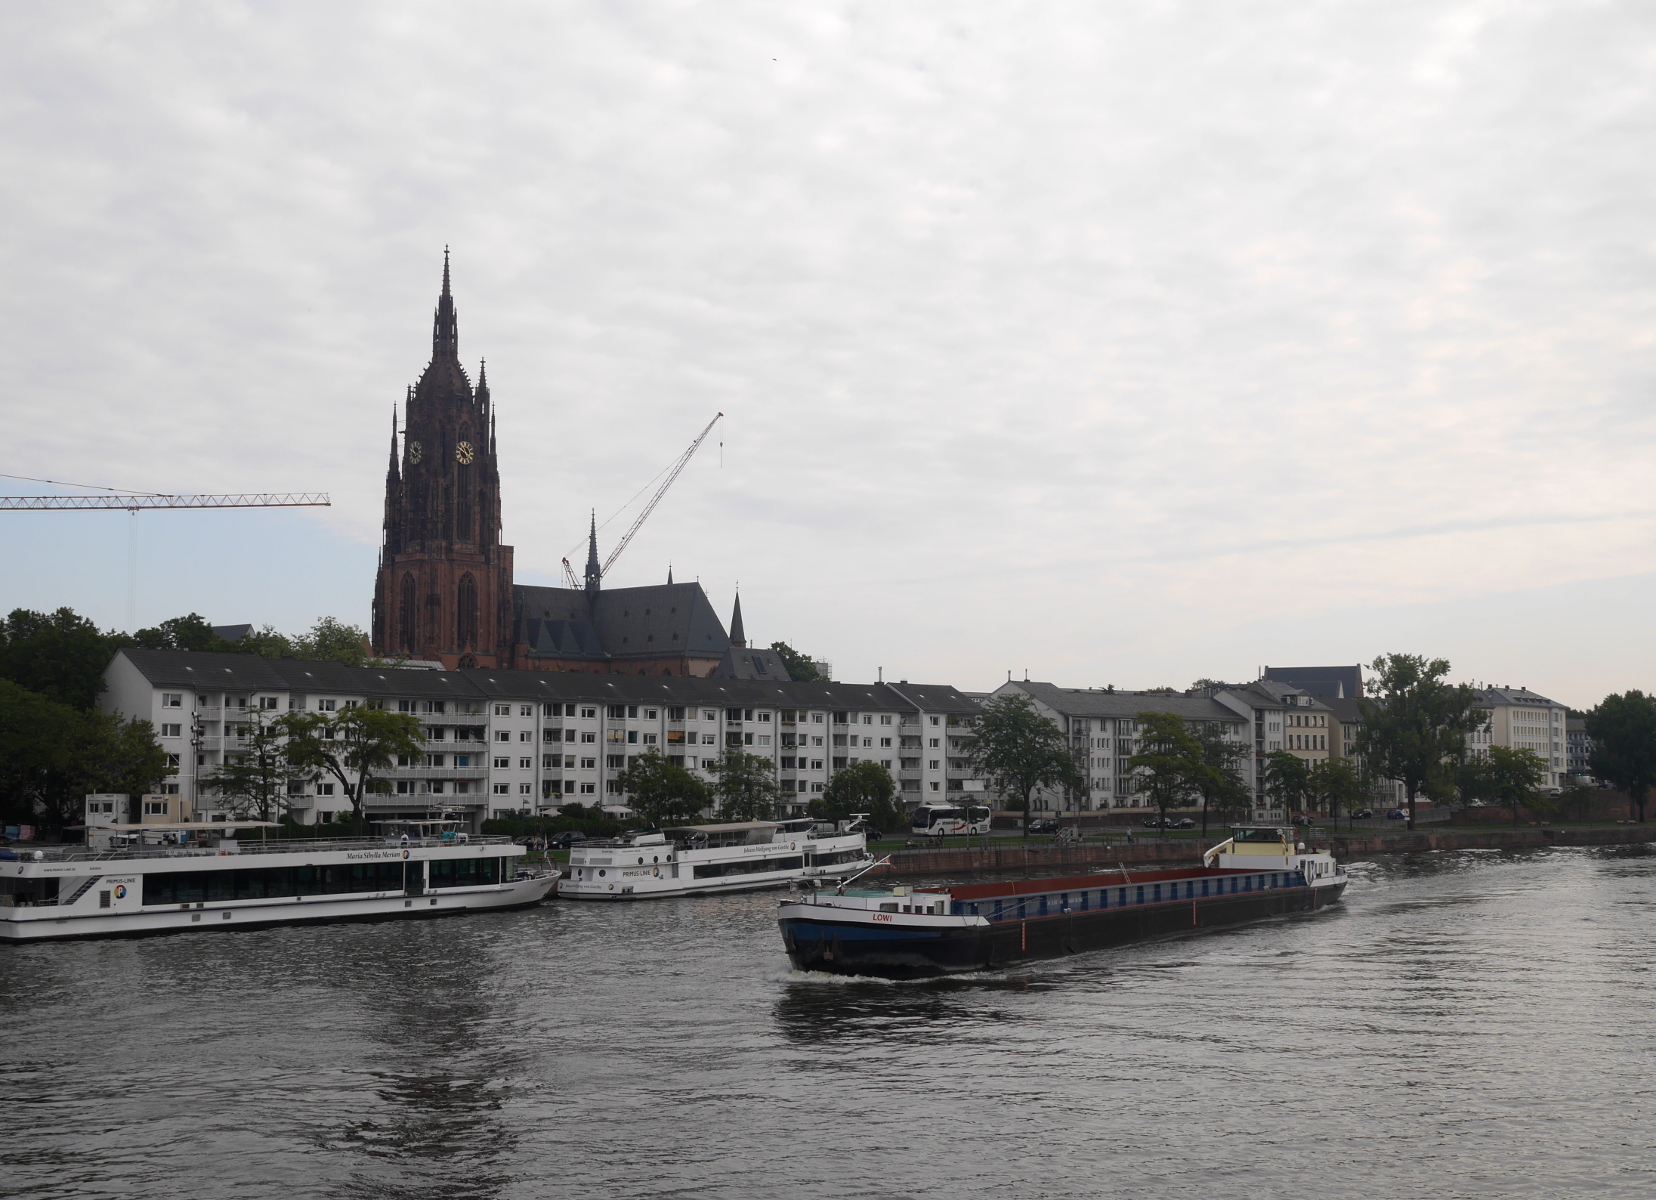 View of the Frankfurter Dom from a bridge over the Main River.